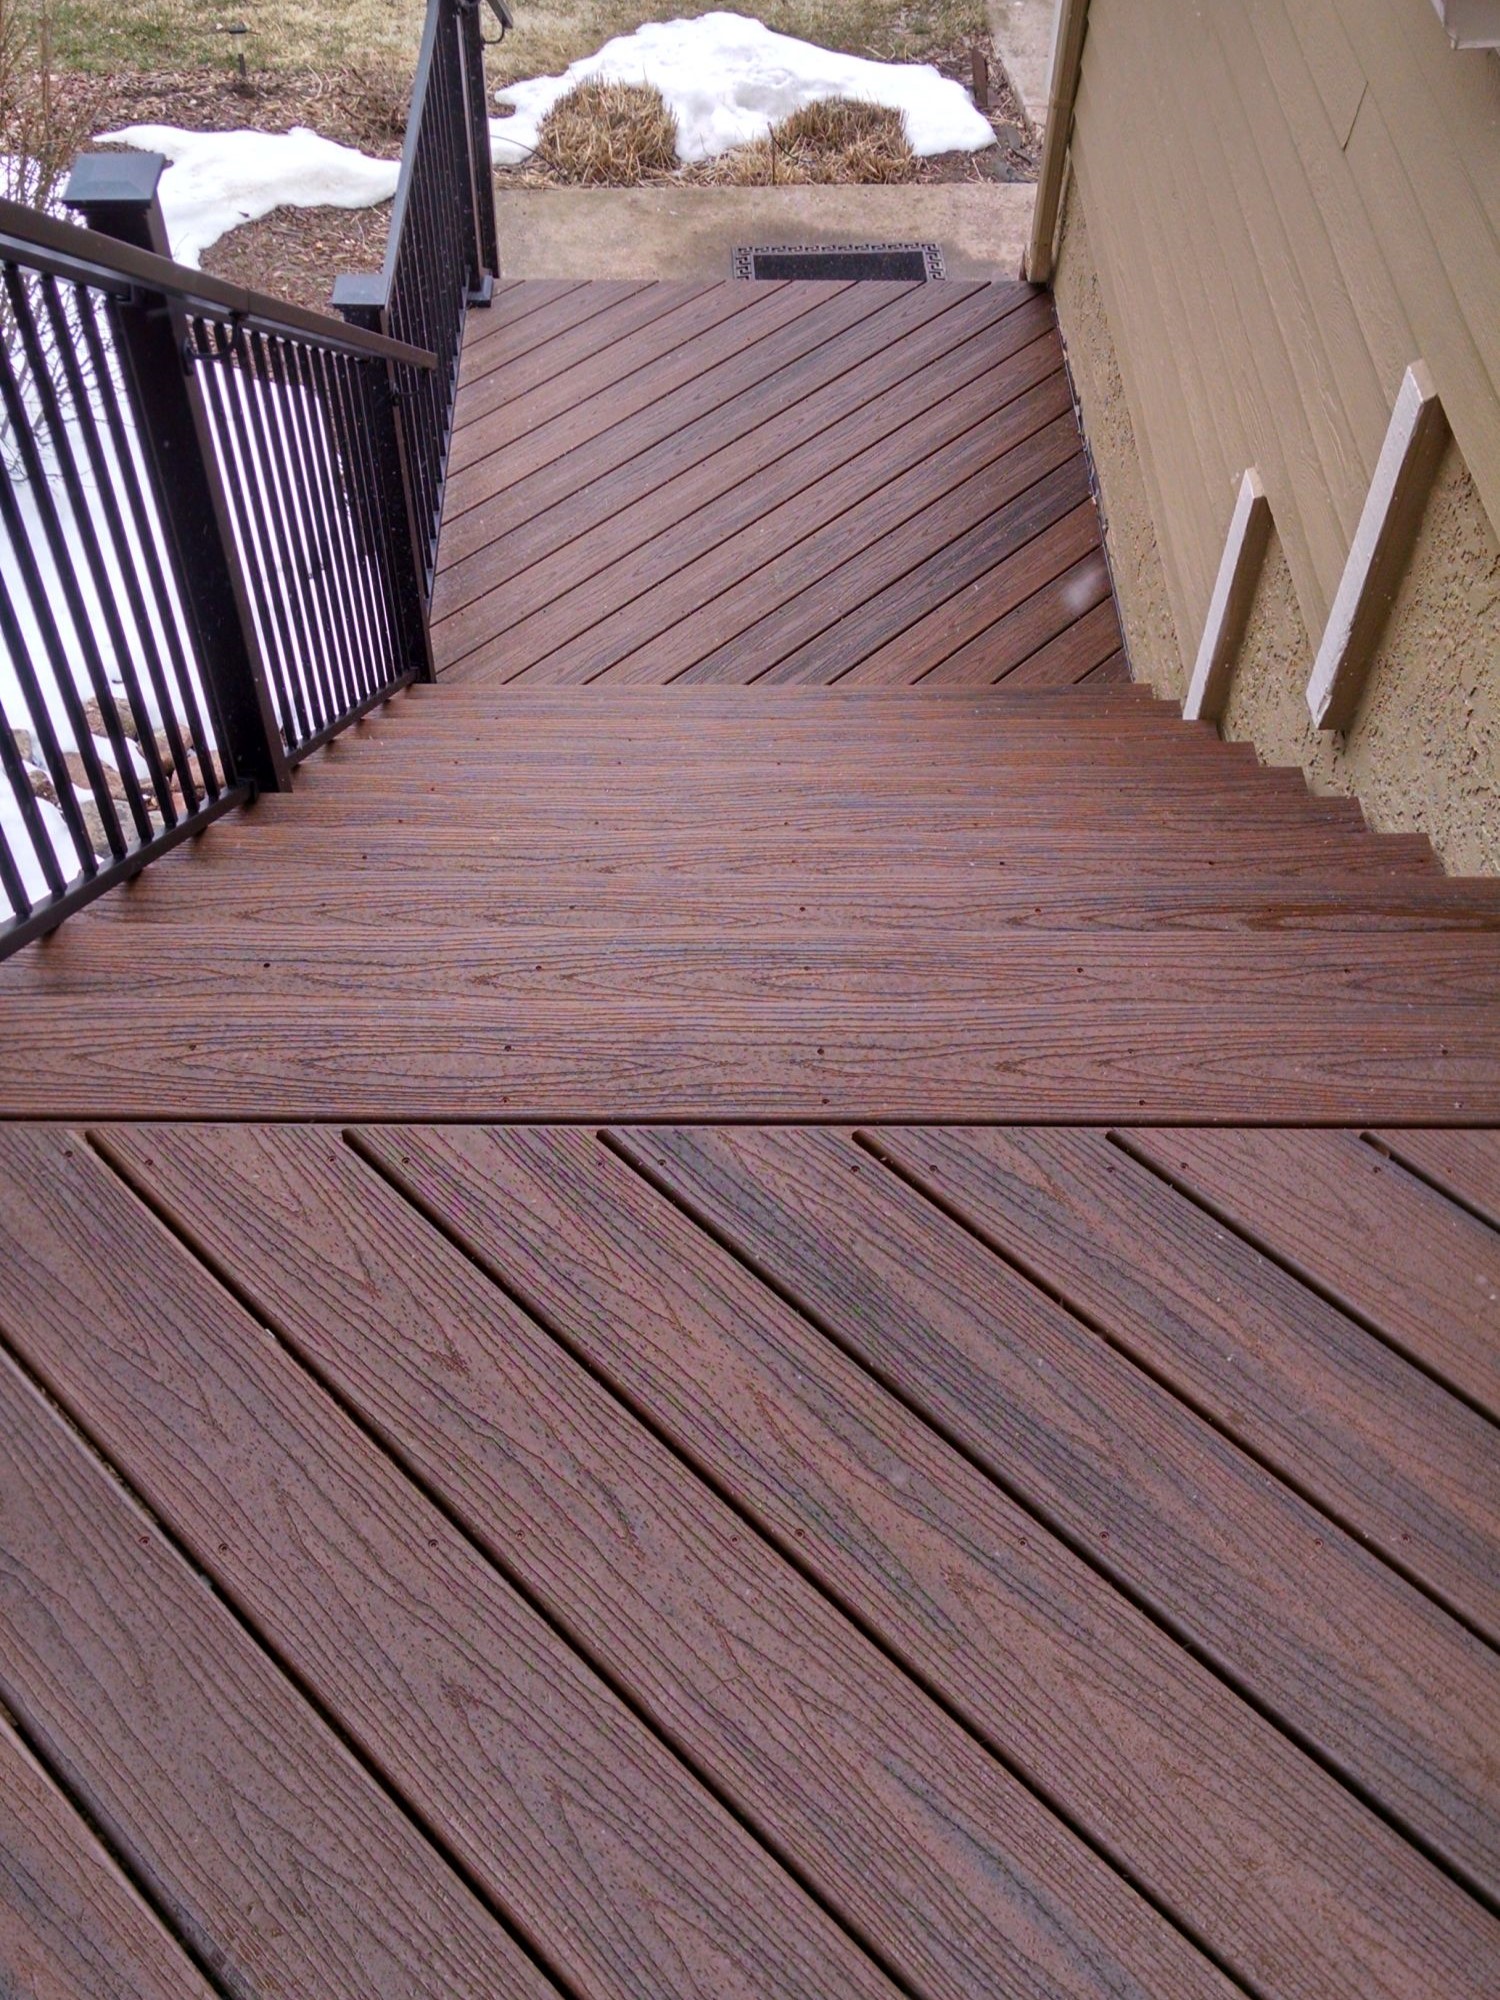 Composite deck with multi-angled boards, metal railing, and 4'-wide deck stairs.